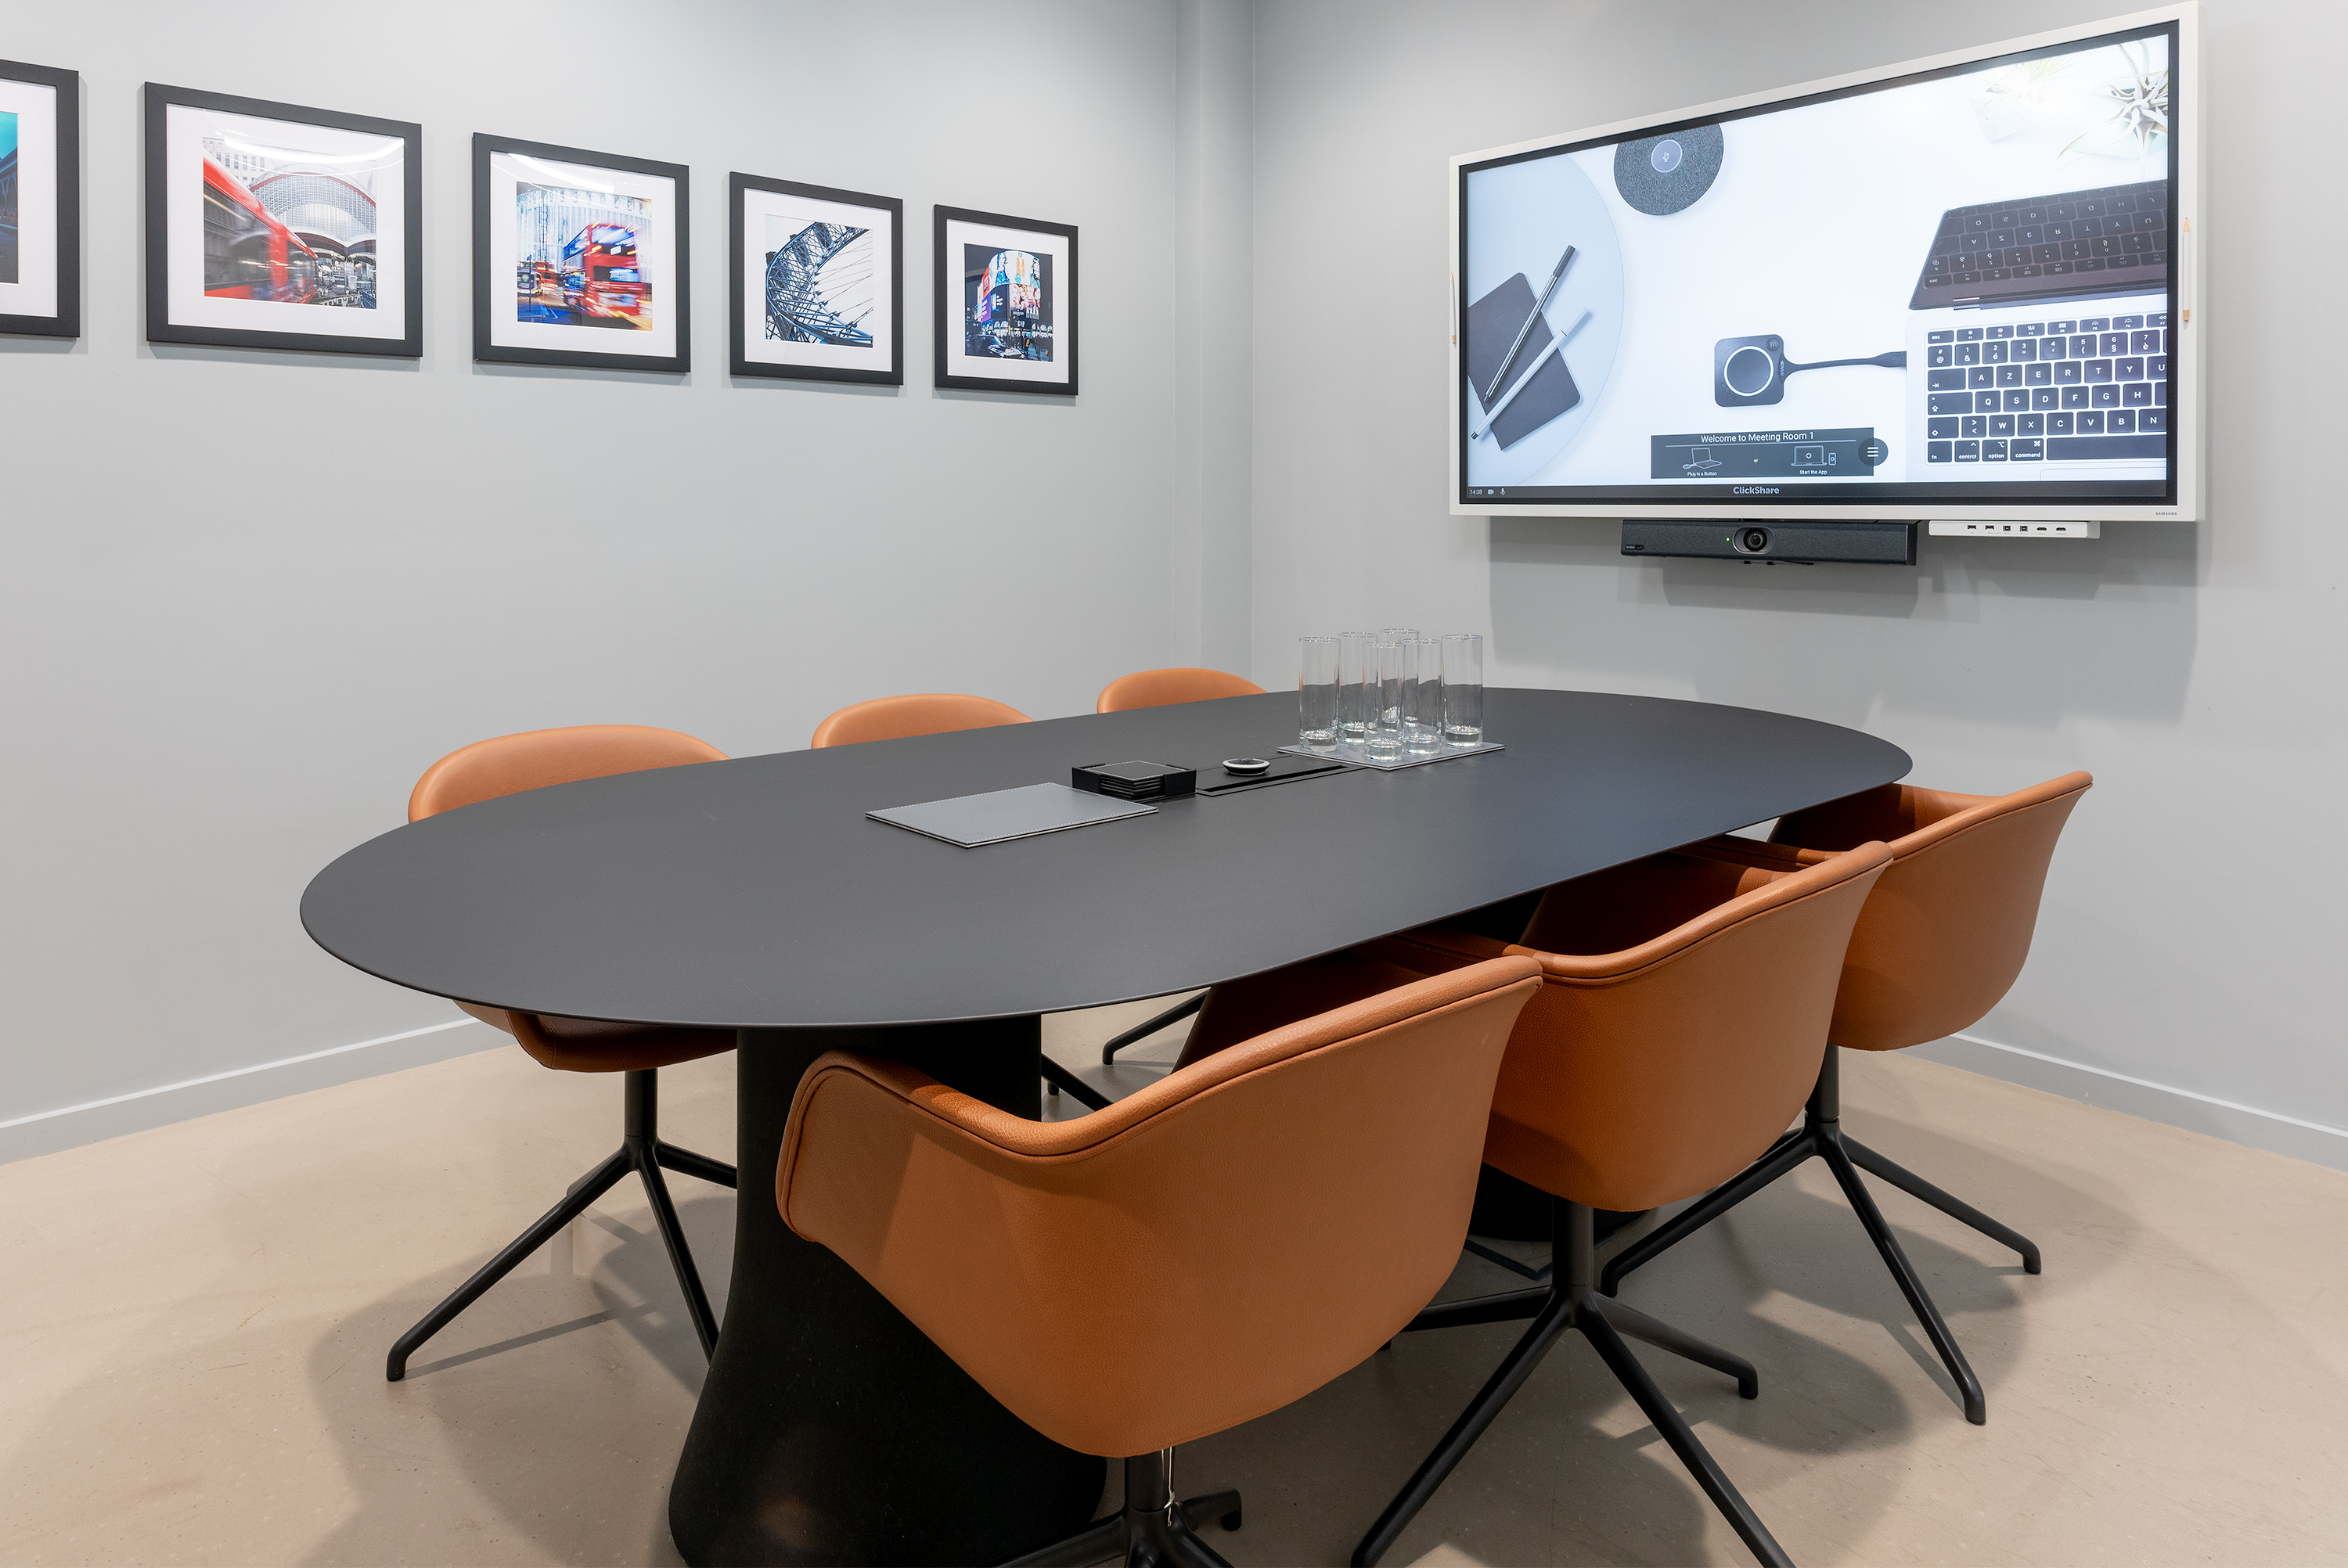 Meeting room with light grey walls and concrete floor, black meeting table, 6 brown tub chairs, large display screen and video conferencing unit, and framed photographs hanging on wall.